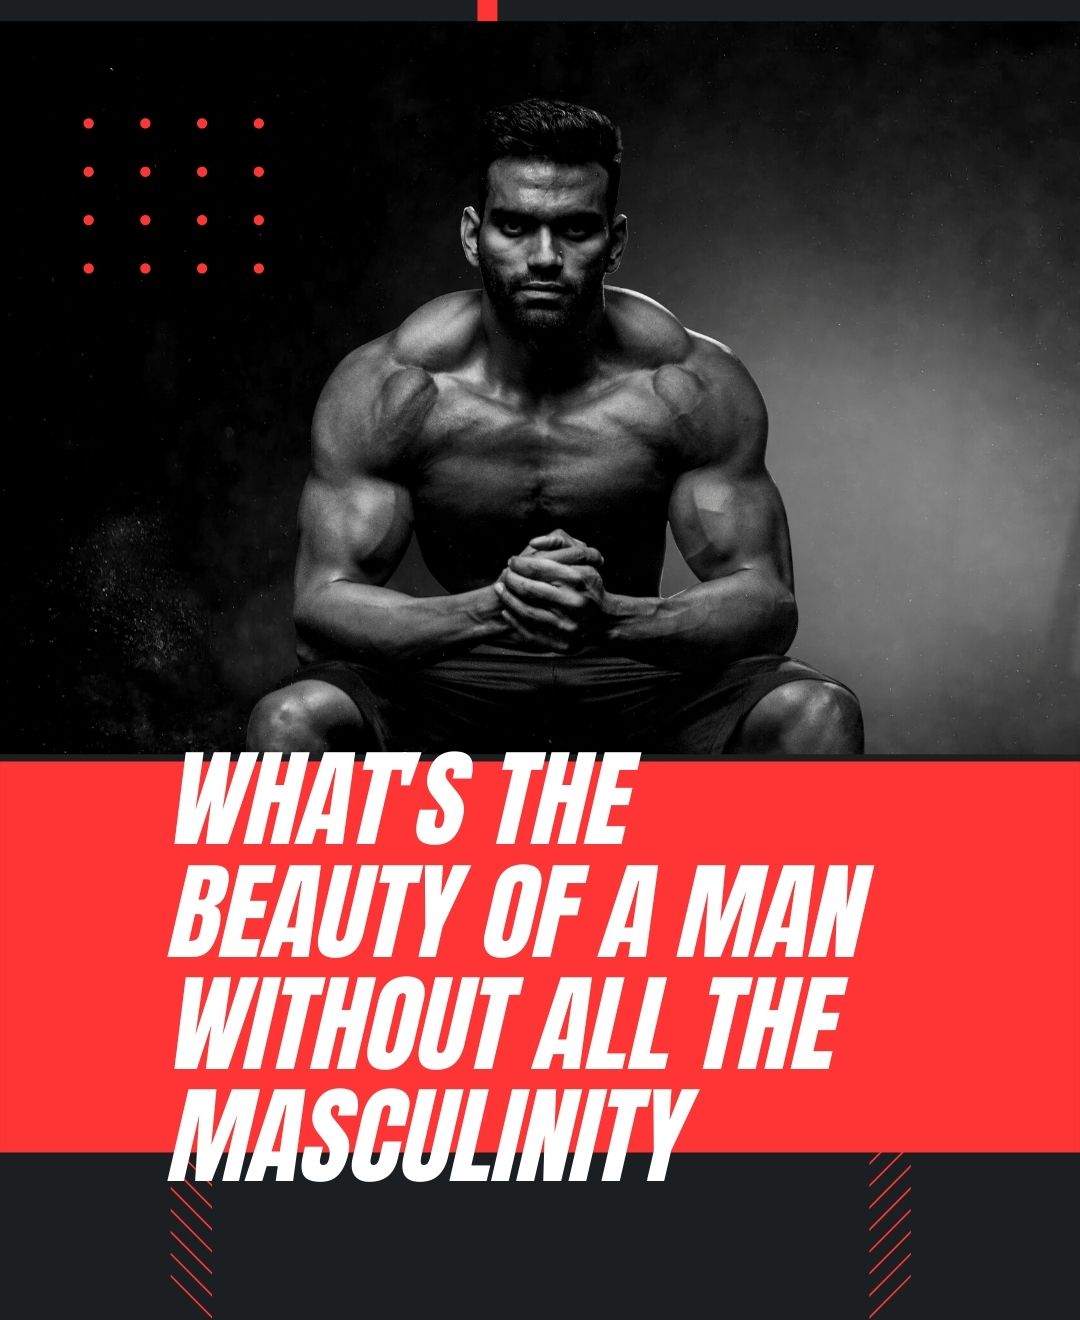 What's the beauty of a man without all the masculinity